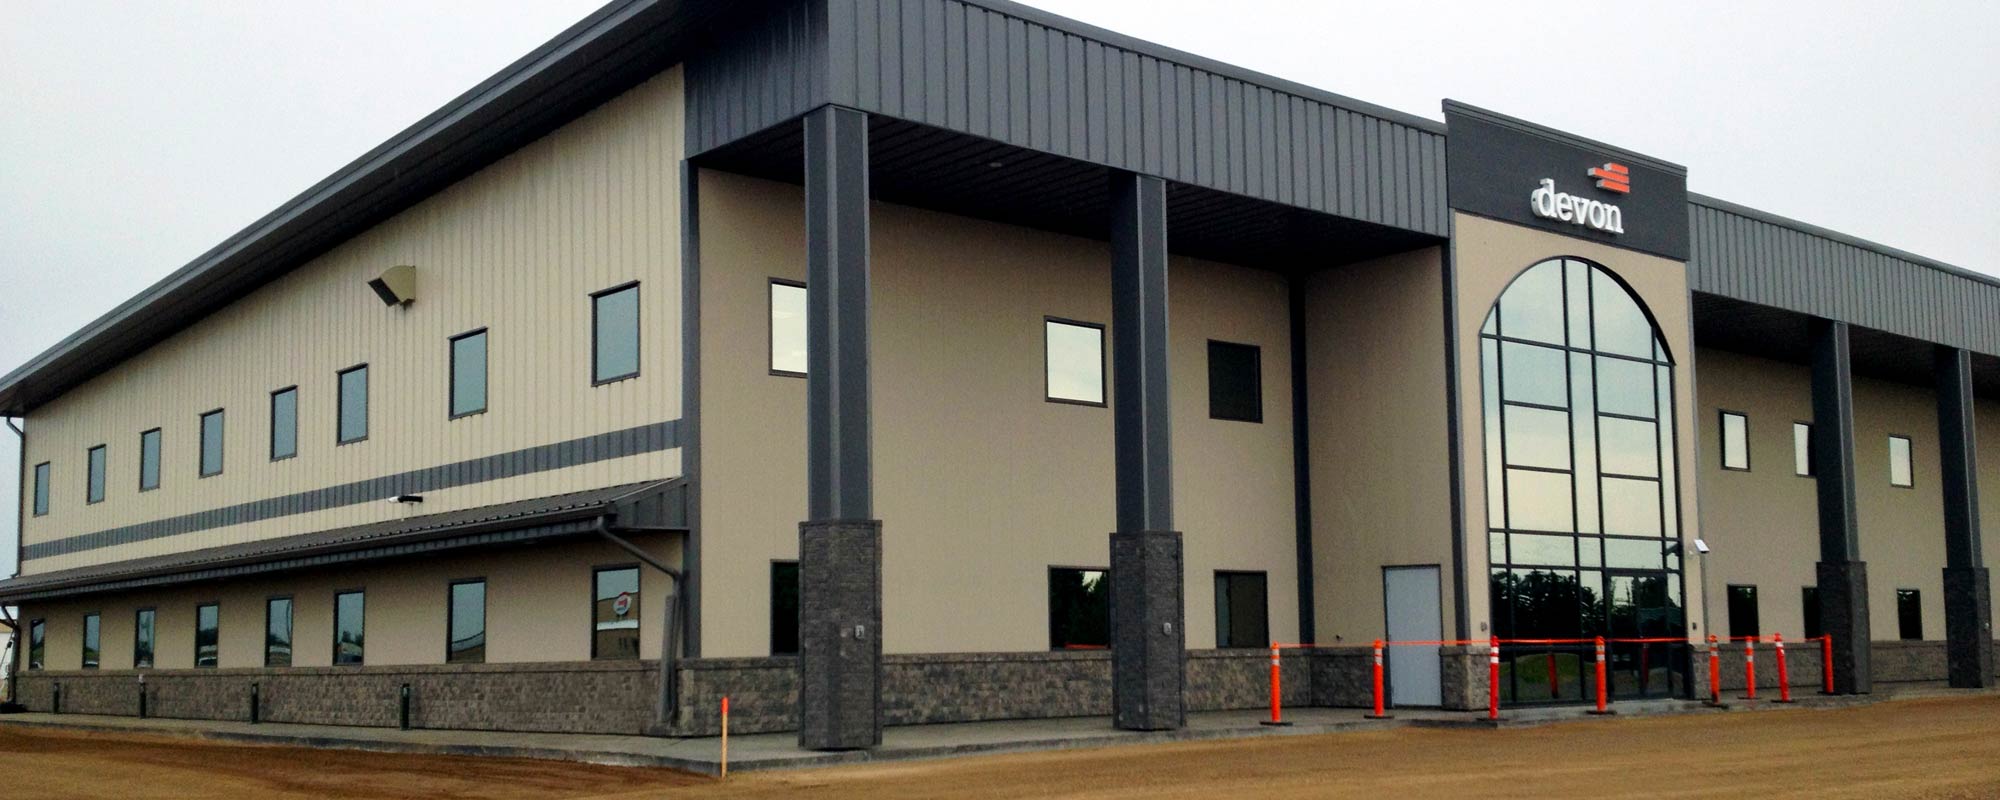 Steel Buildings and Cladding